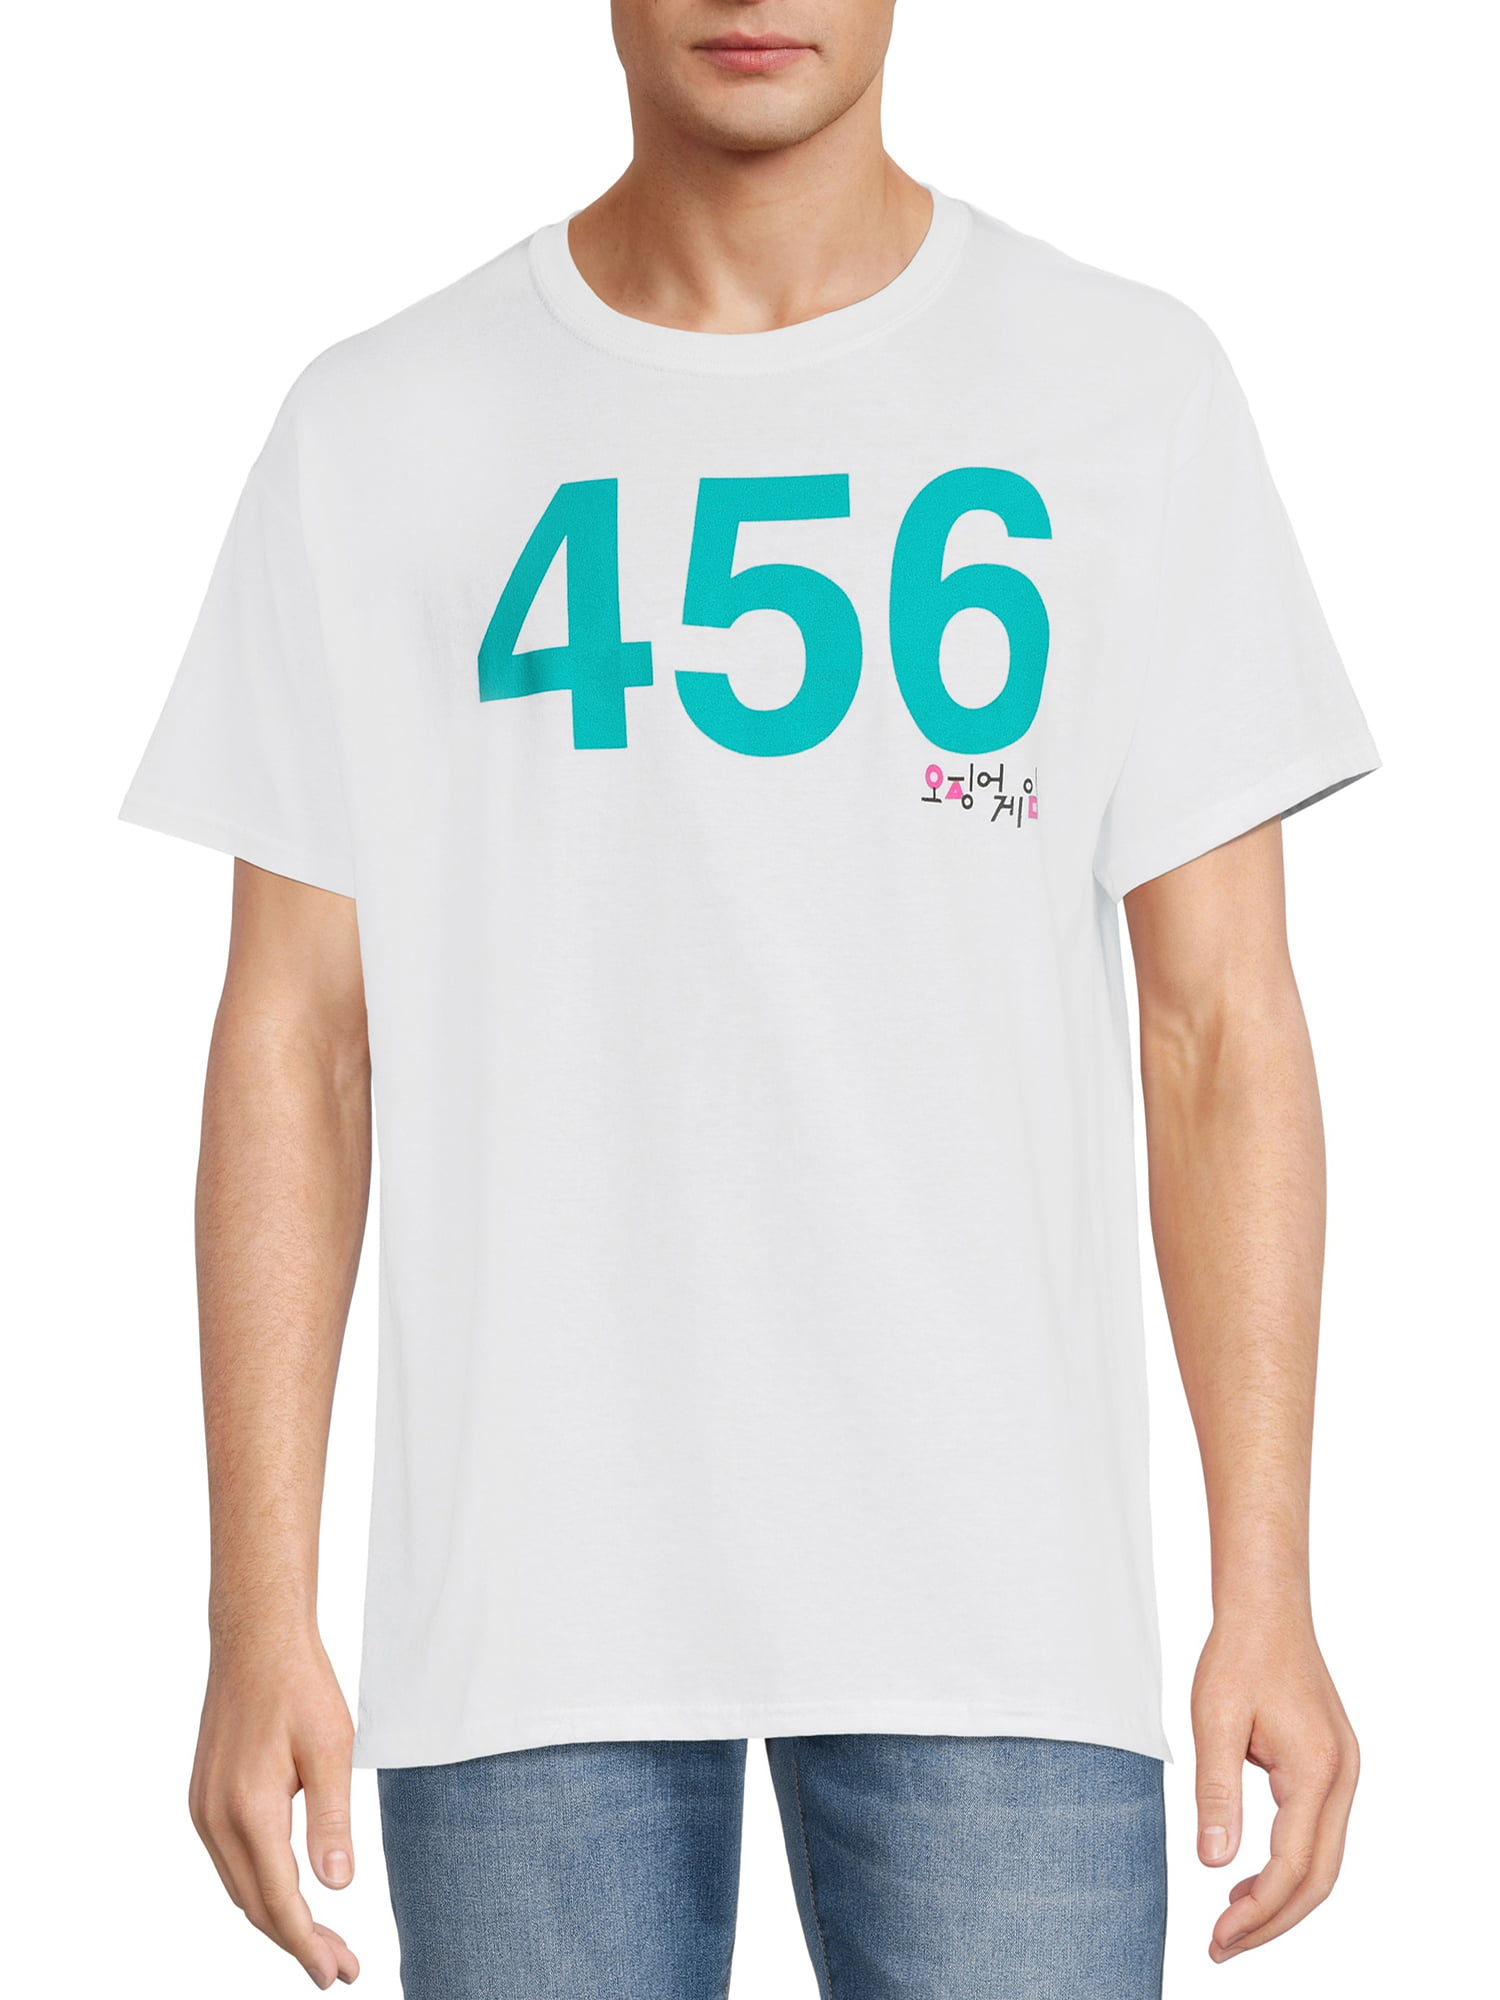 Men's Squid Game Player 456 Graphic Tee White Small